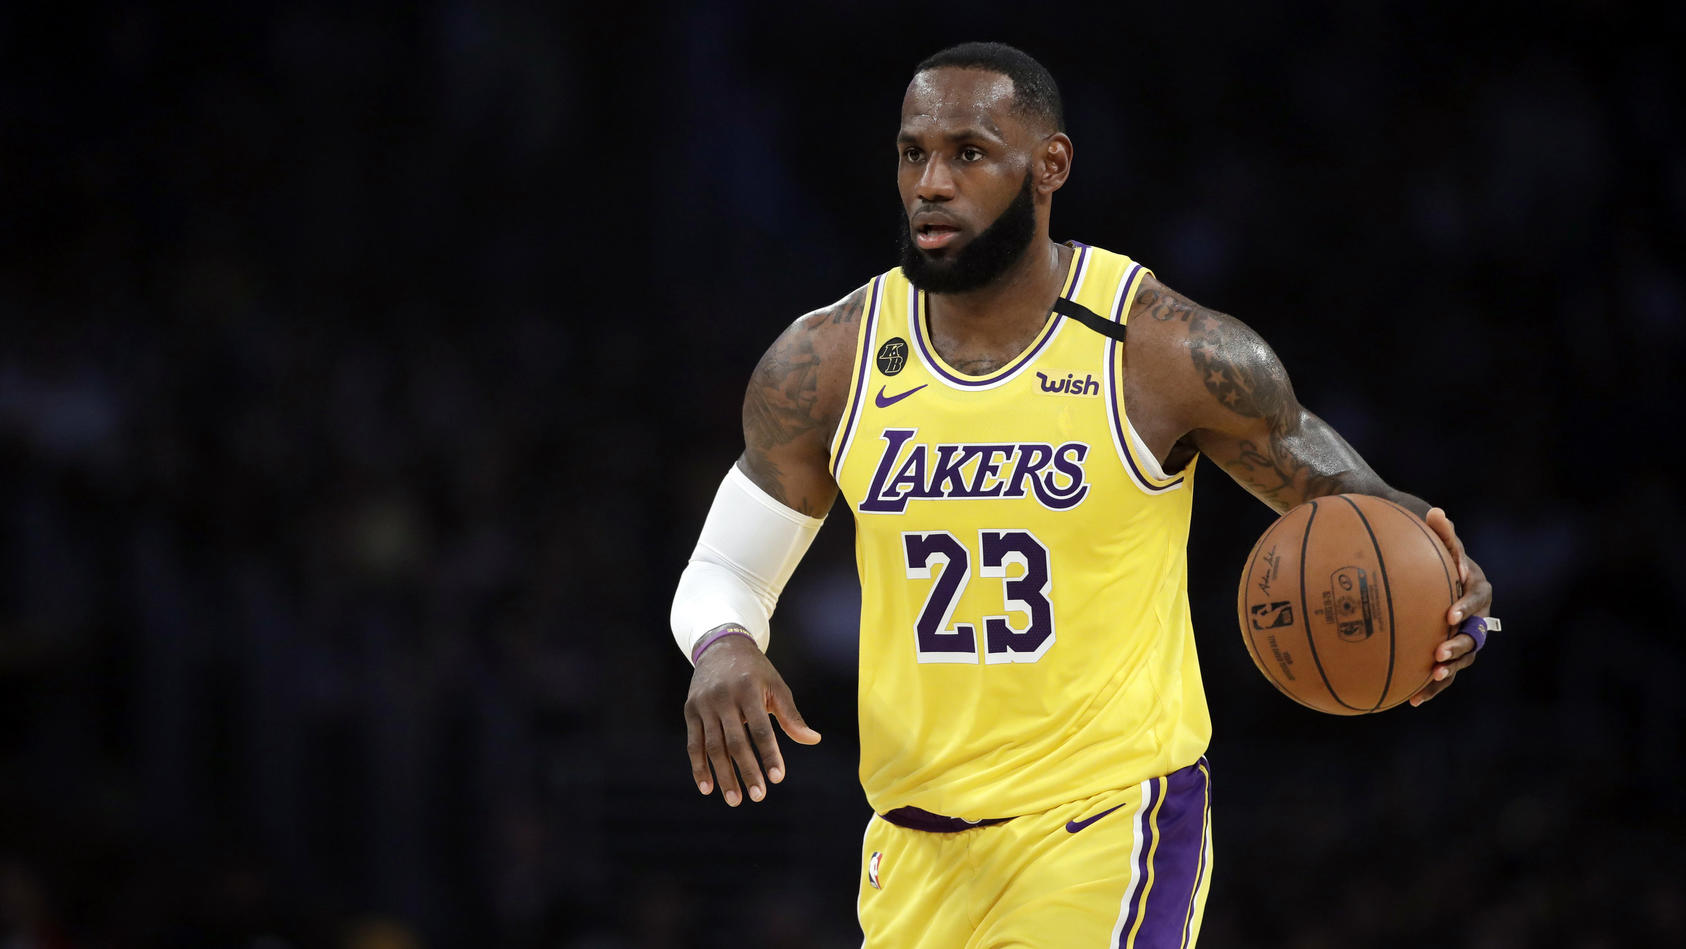 FILE - In this March 10, 2020, file photo, Los Angeles Lakers' LeBron James (23) dribbles during the first half of an NBA basketball game against the Brooklyn Nets in Los Angeles. If James gets his way, NBA arenas and other sports venues around the c